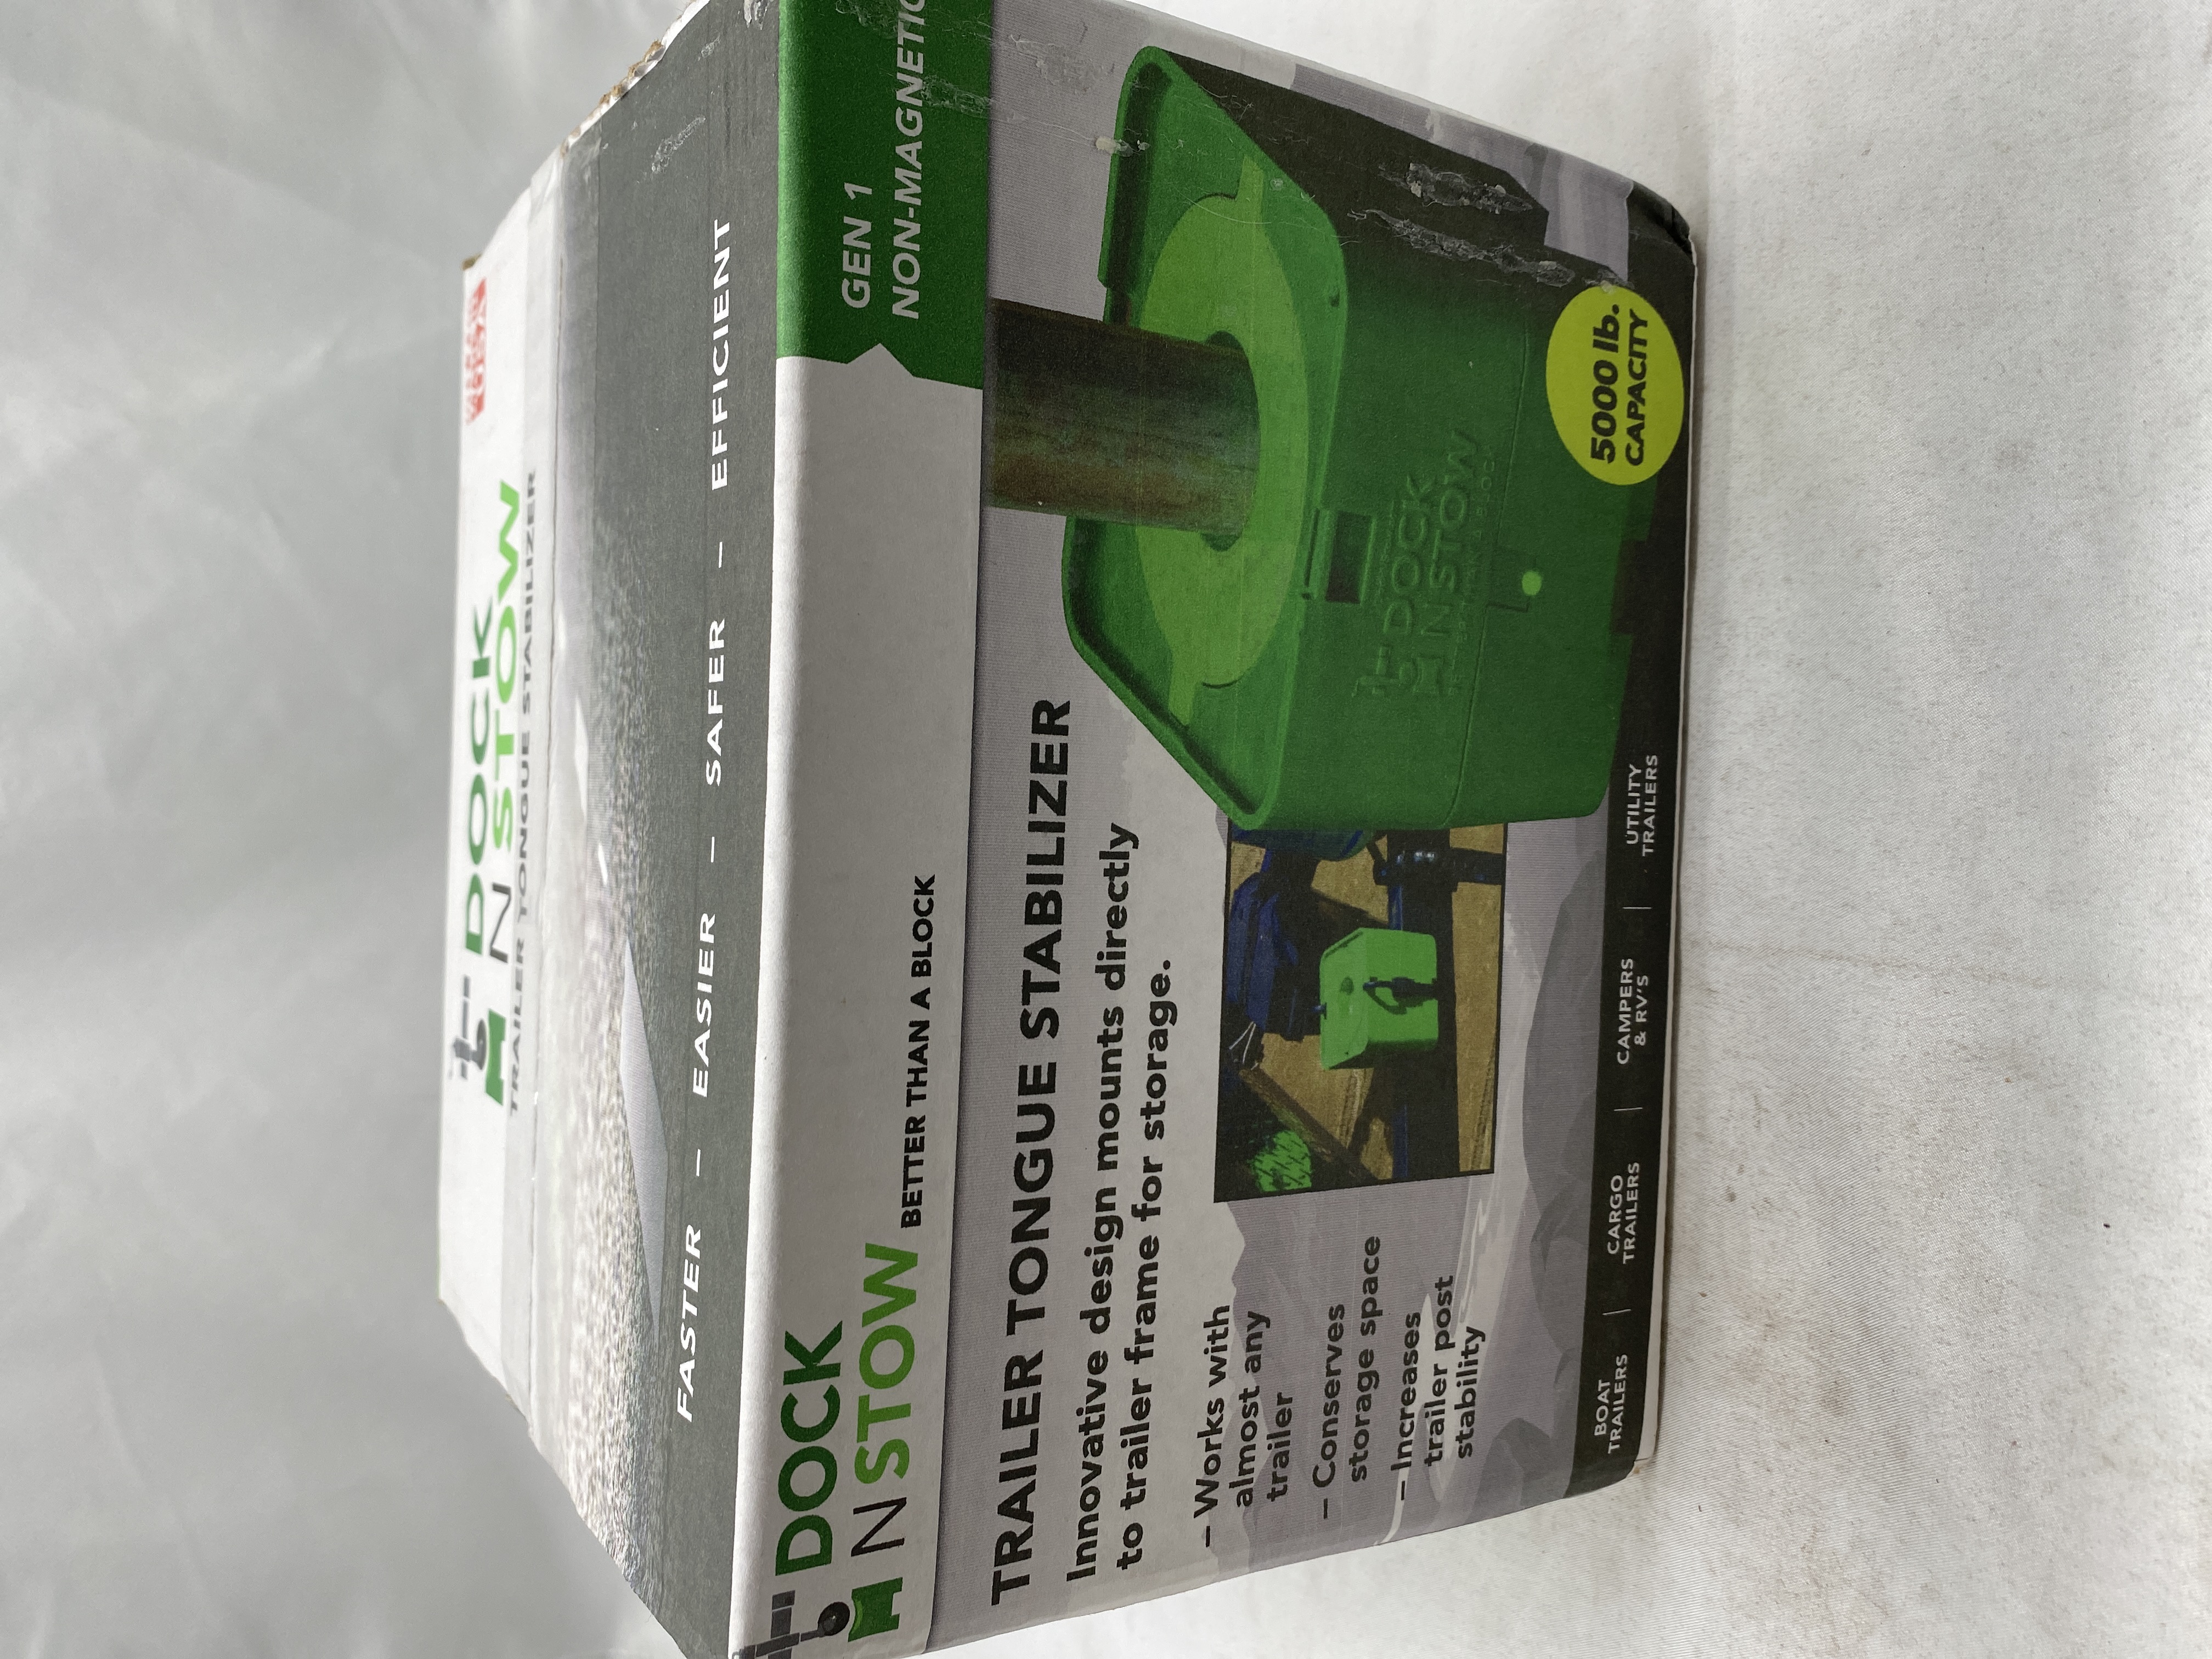 Photo 2 of Dock N Stow Trailer Jack Block, RV Tongue Stand Stores on Frame, Fits Most Jack, Post, Foot, or Wheel, for Camper, Pop Up, Boat, or Travel Trailer, Green GEN1 NEW